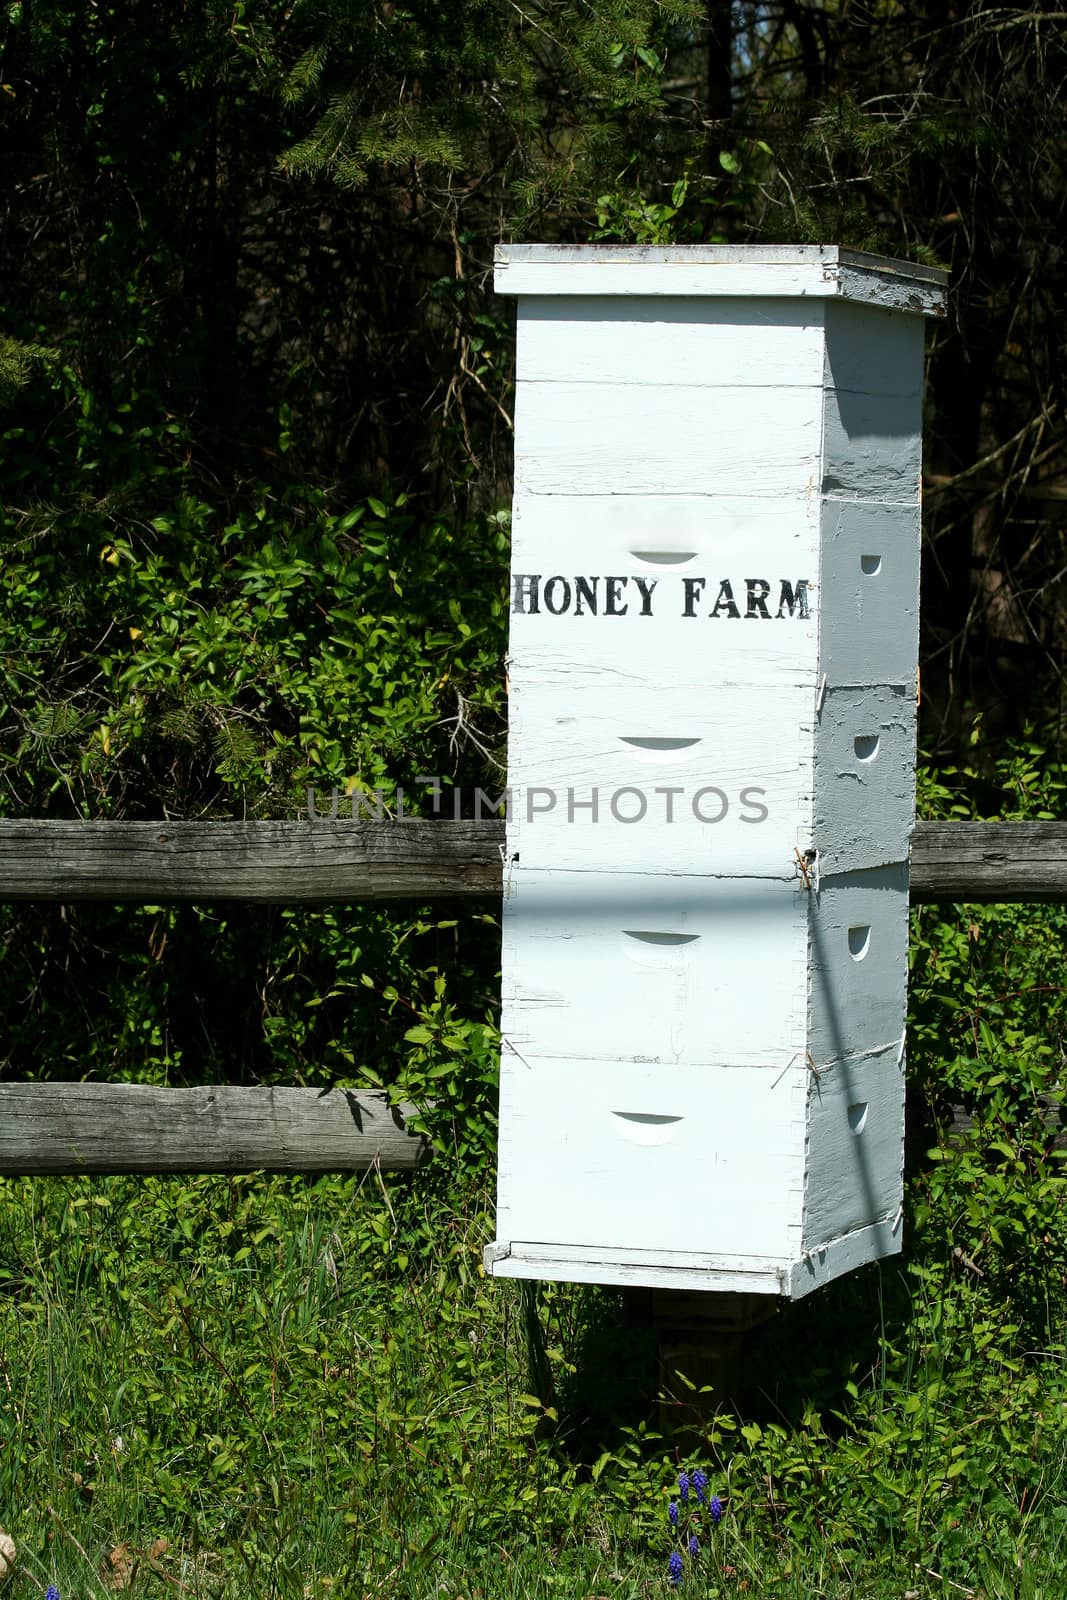 A image of a beehive colony